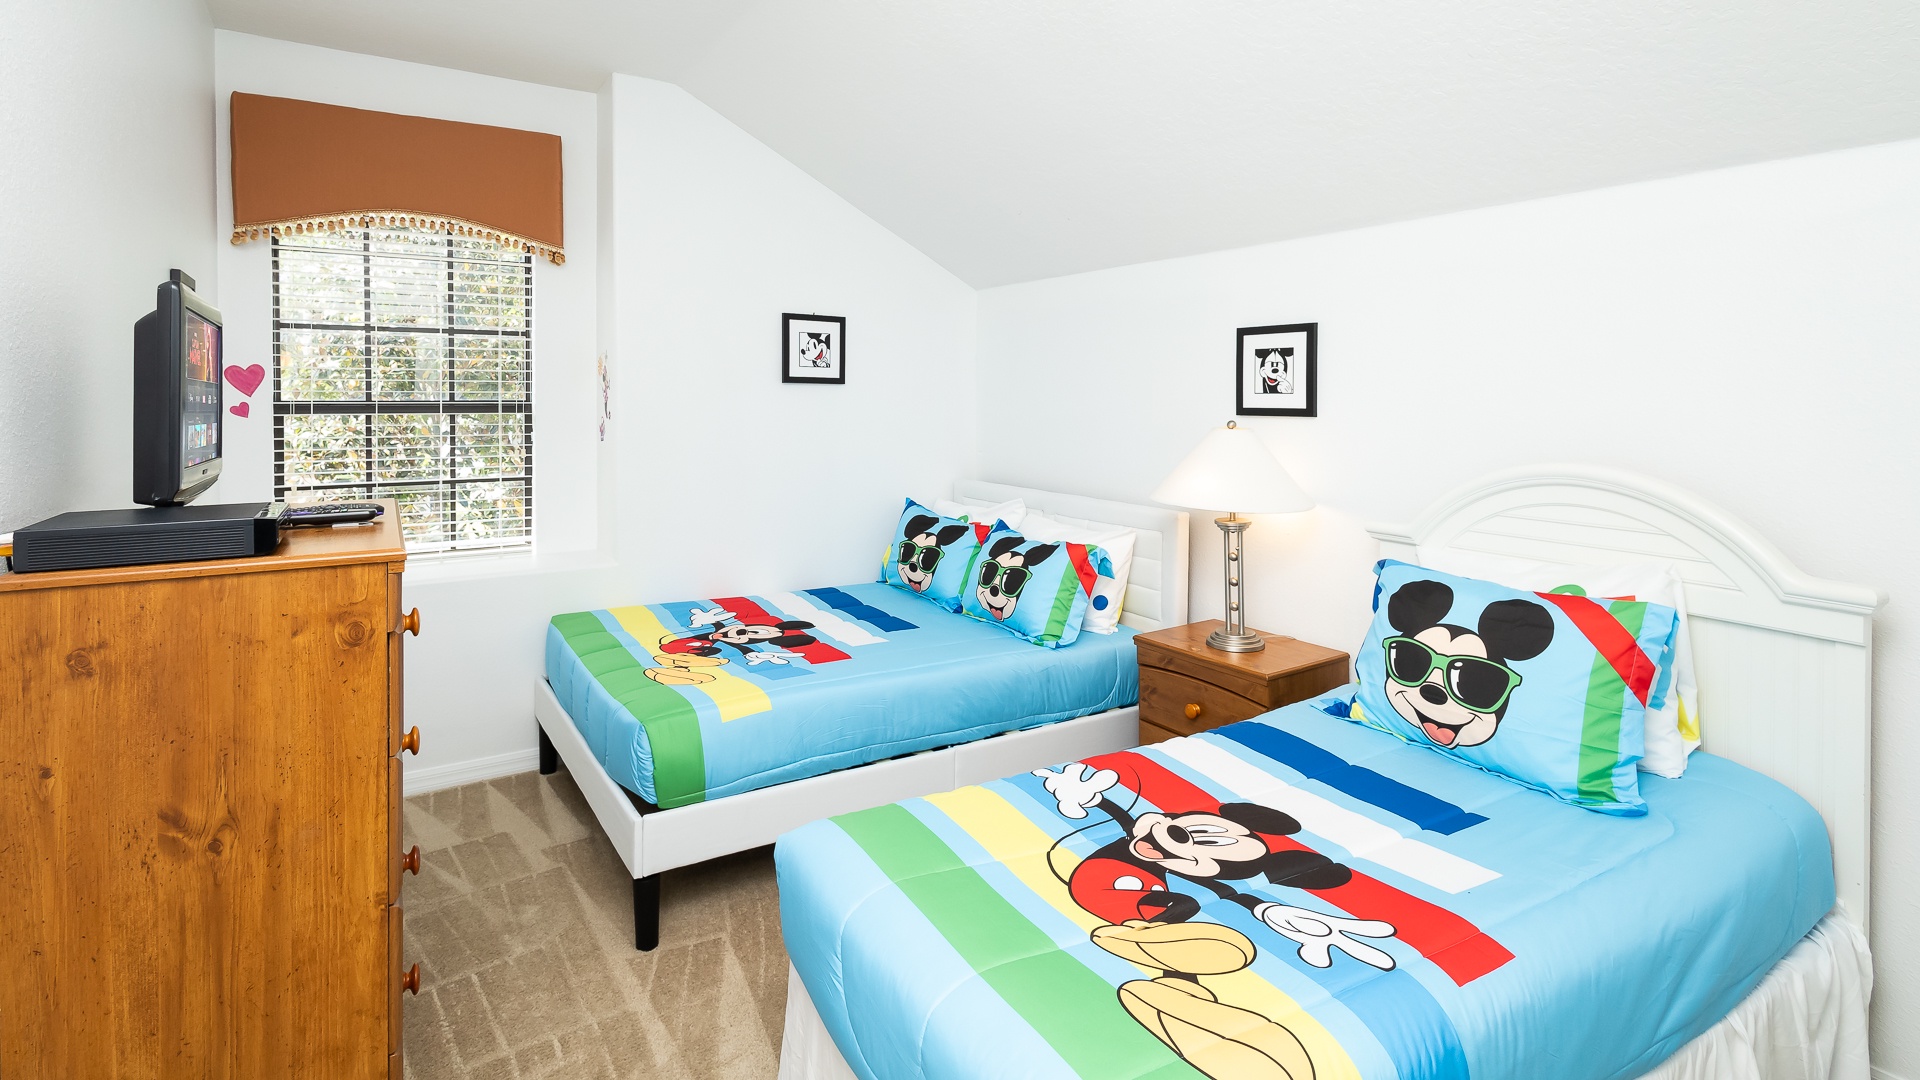 Bedroom 4 Mickey Mouse themed with full bed, twin bed, and Smart TV